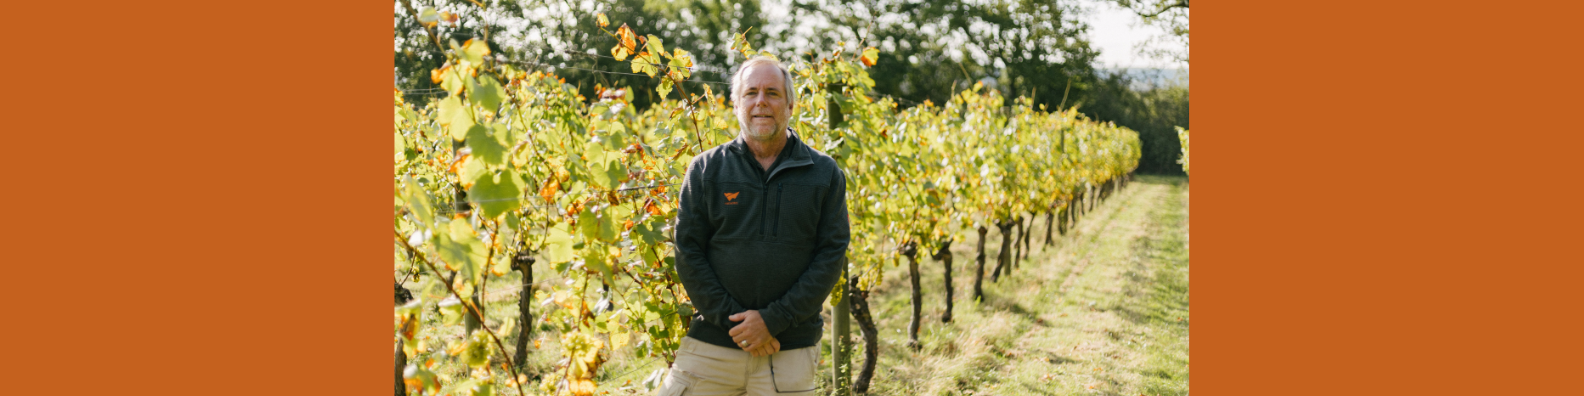 James Dodson appointed lead viticulturist for Jackson Family Wines' UK wine production operations